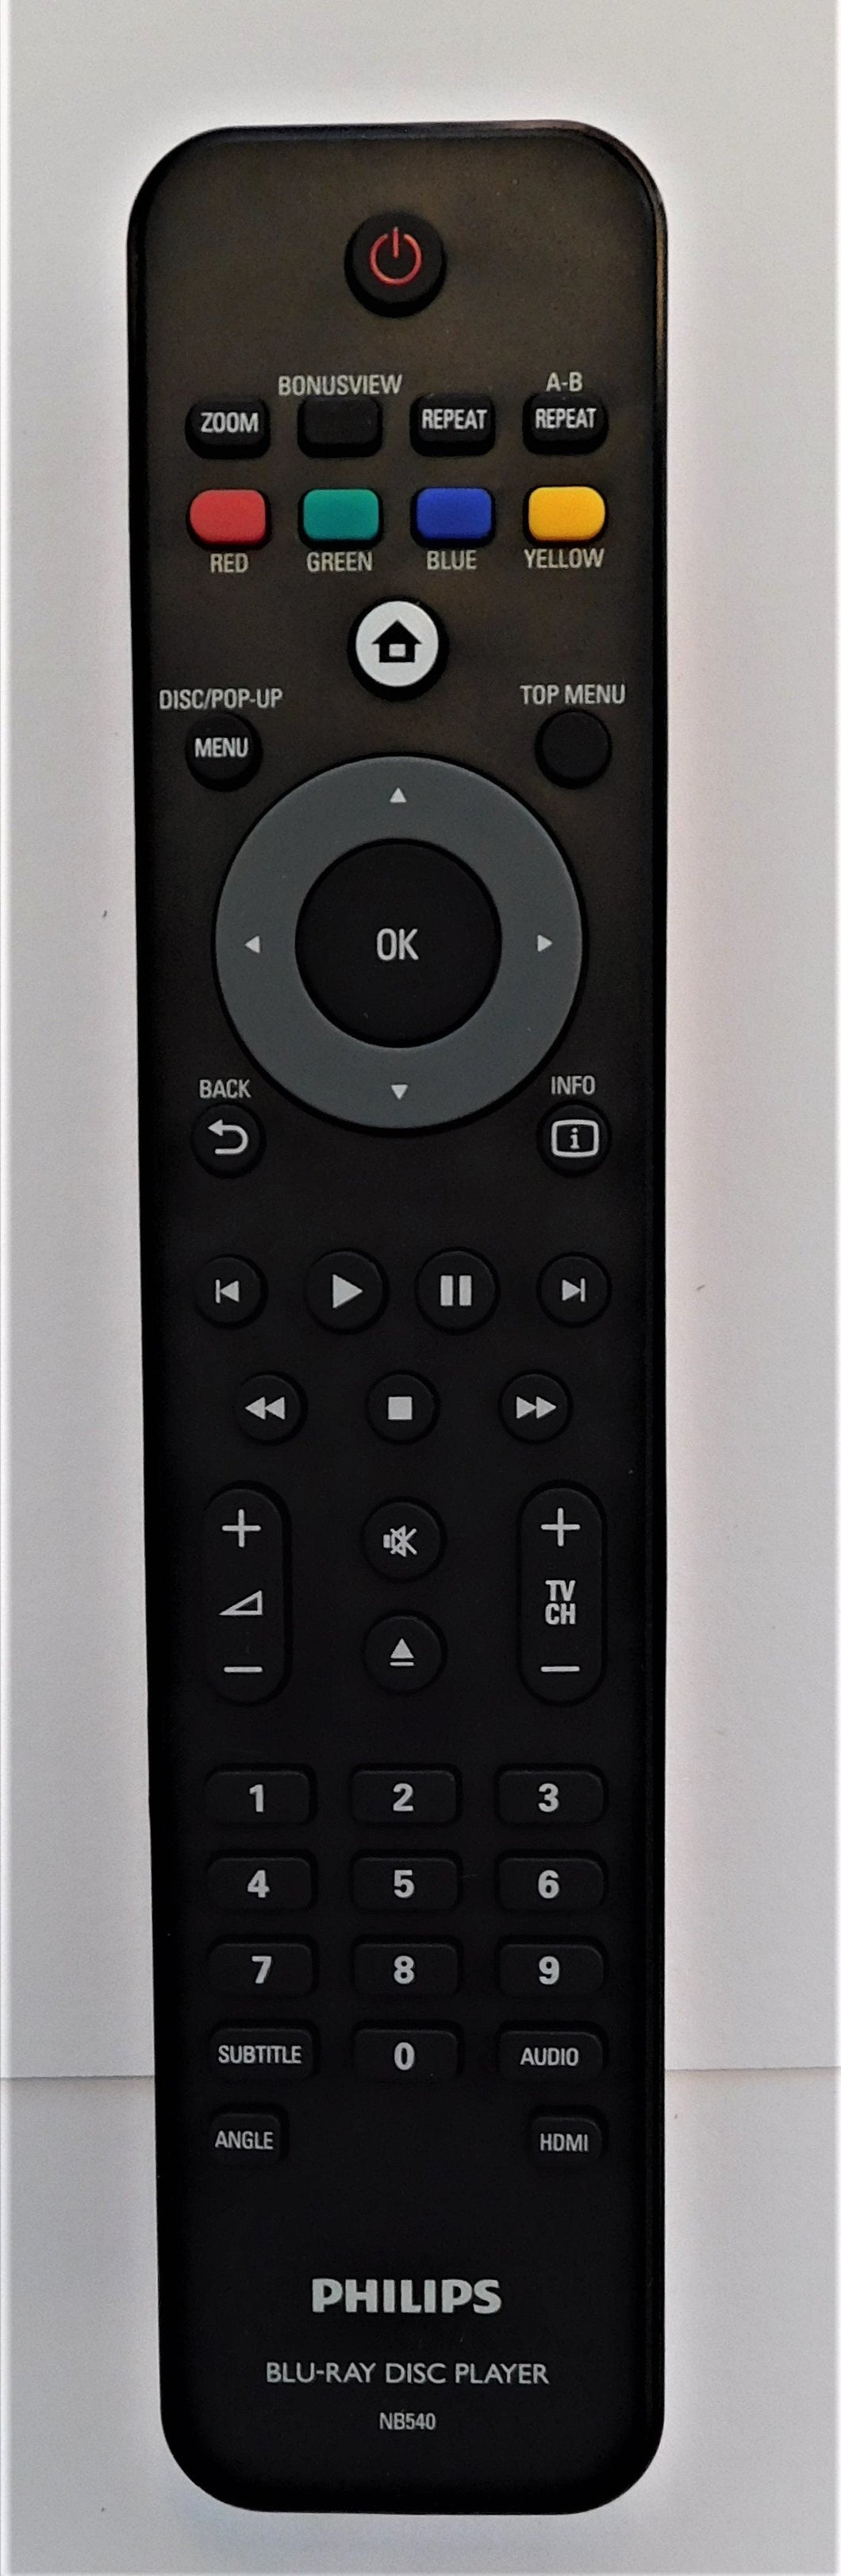 Original OEM replacement remote control for Philips Blu-ray players NB540UD